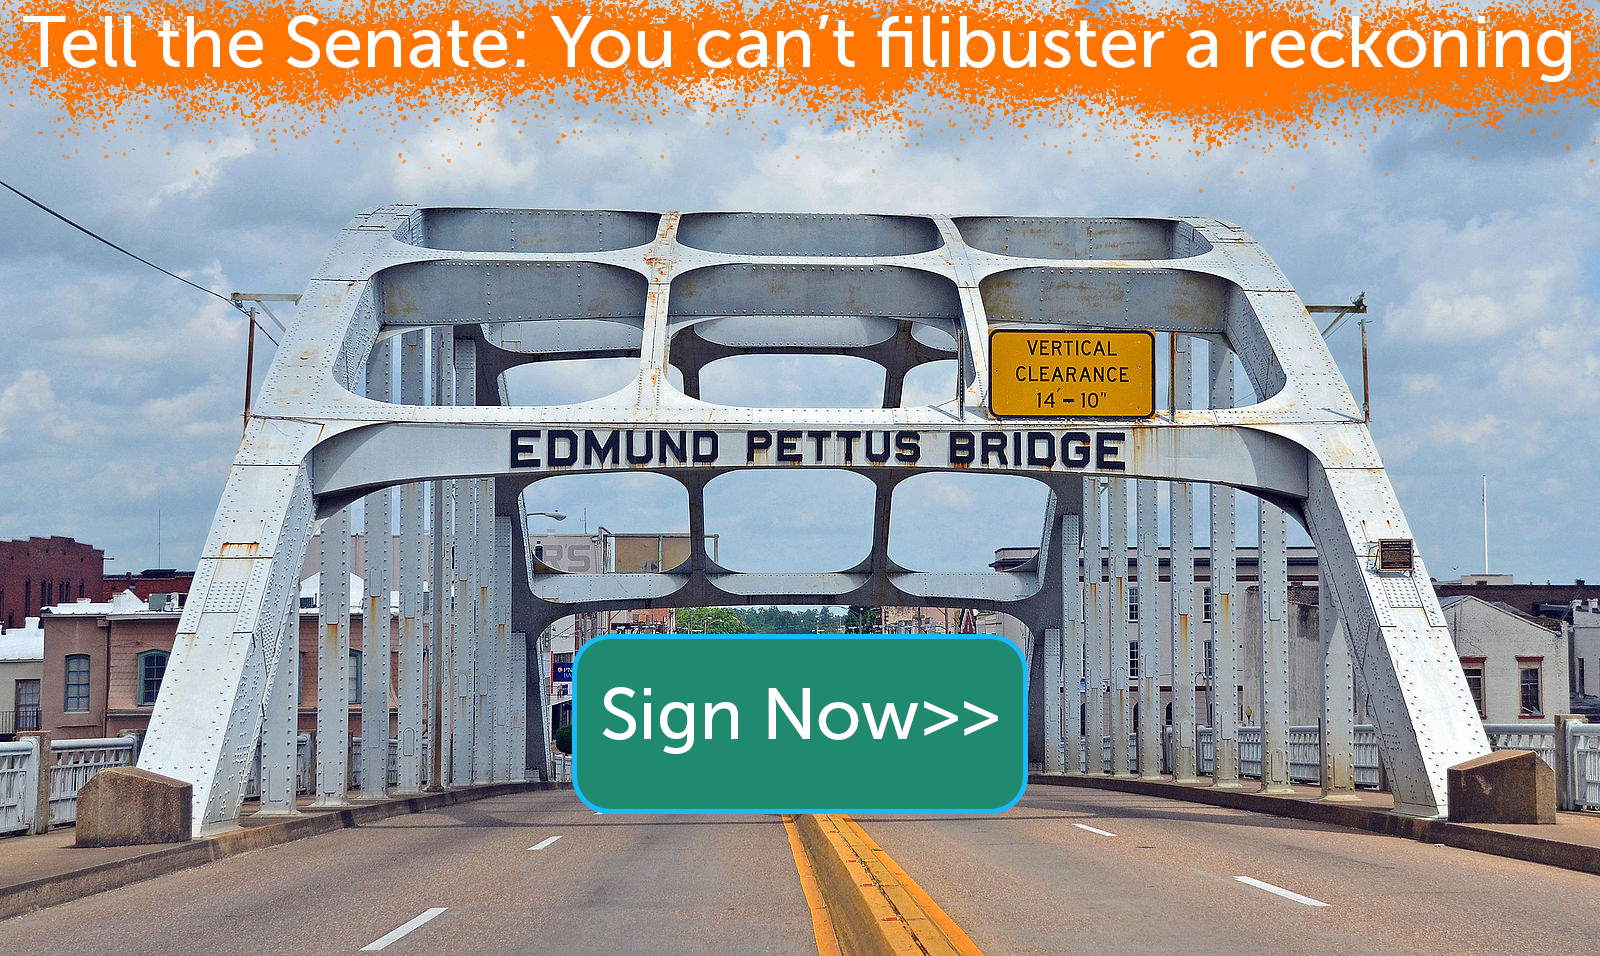 Tell the Senate you can't filibuster a reckoning